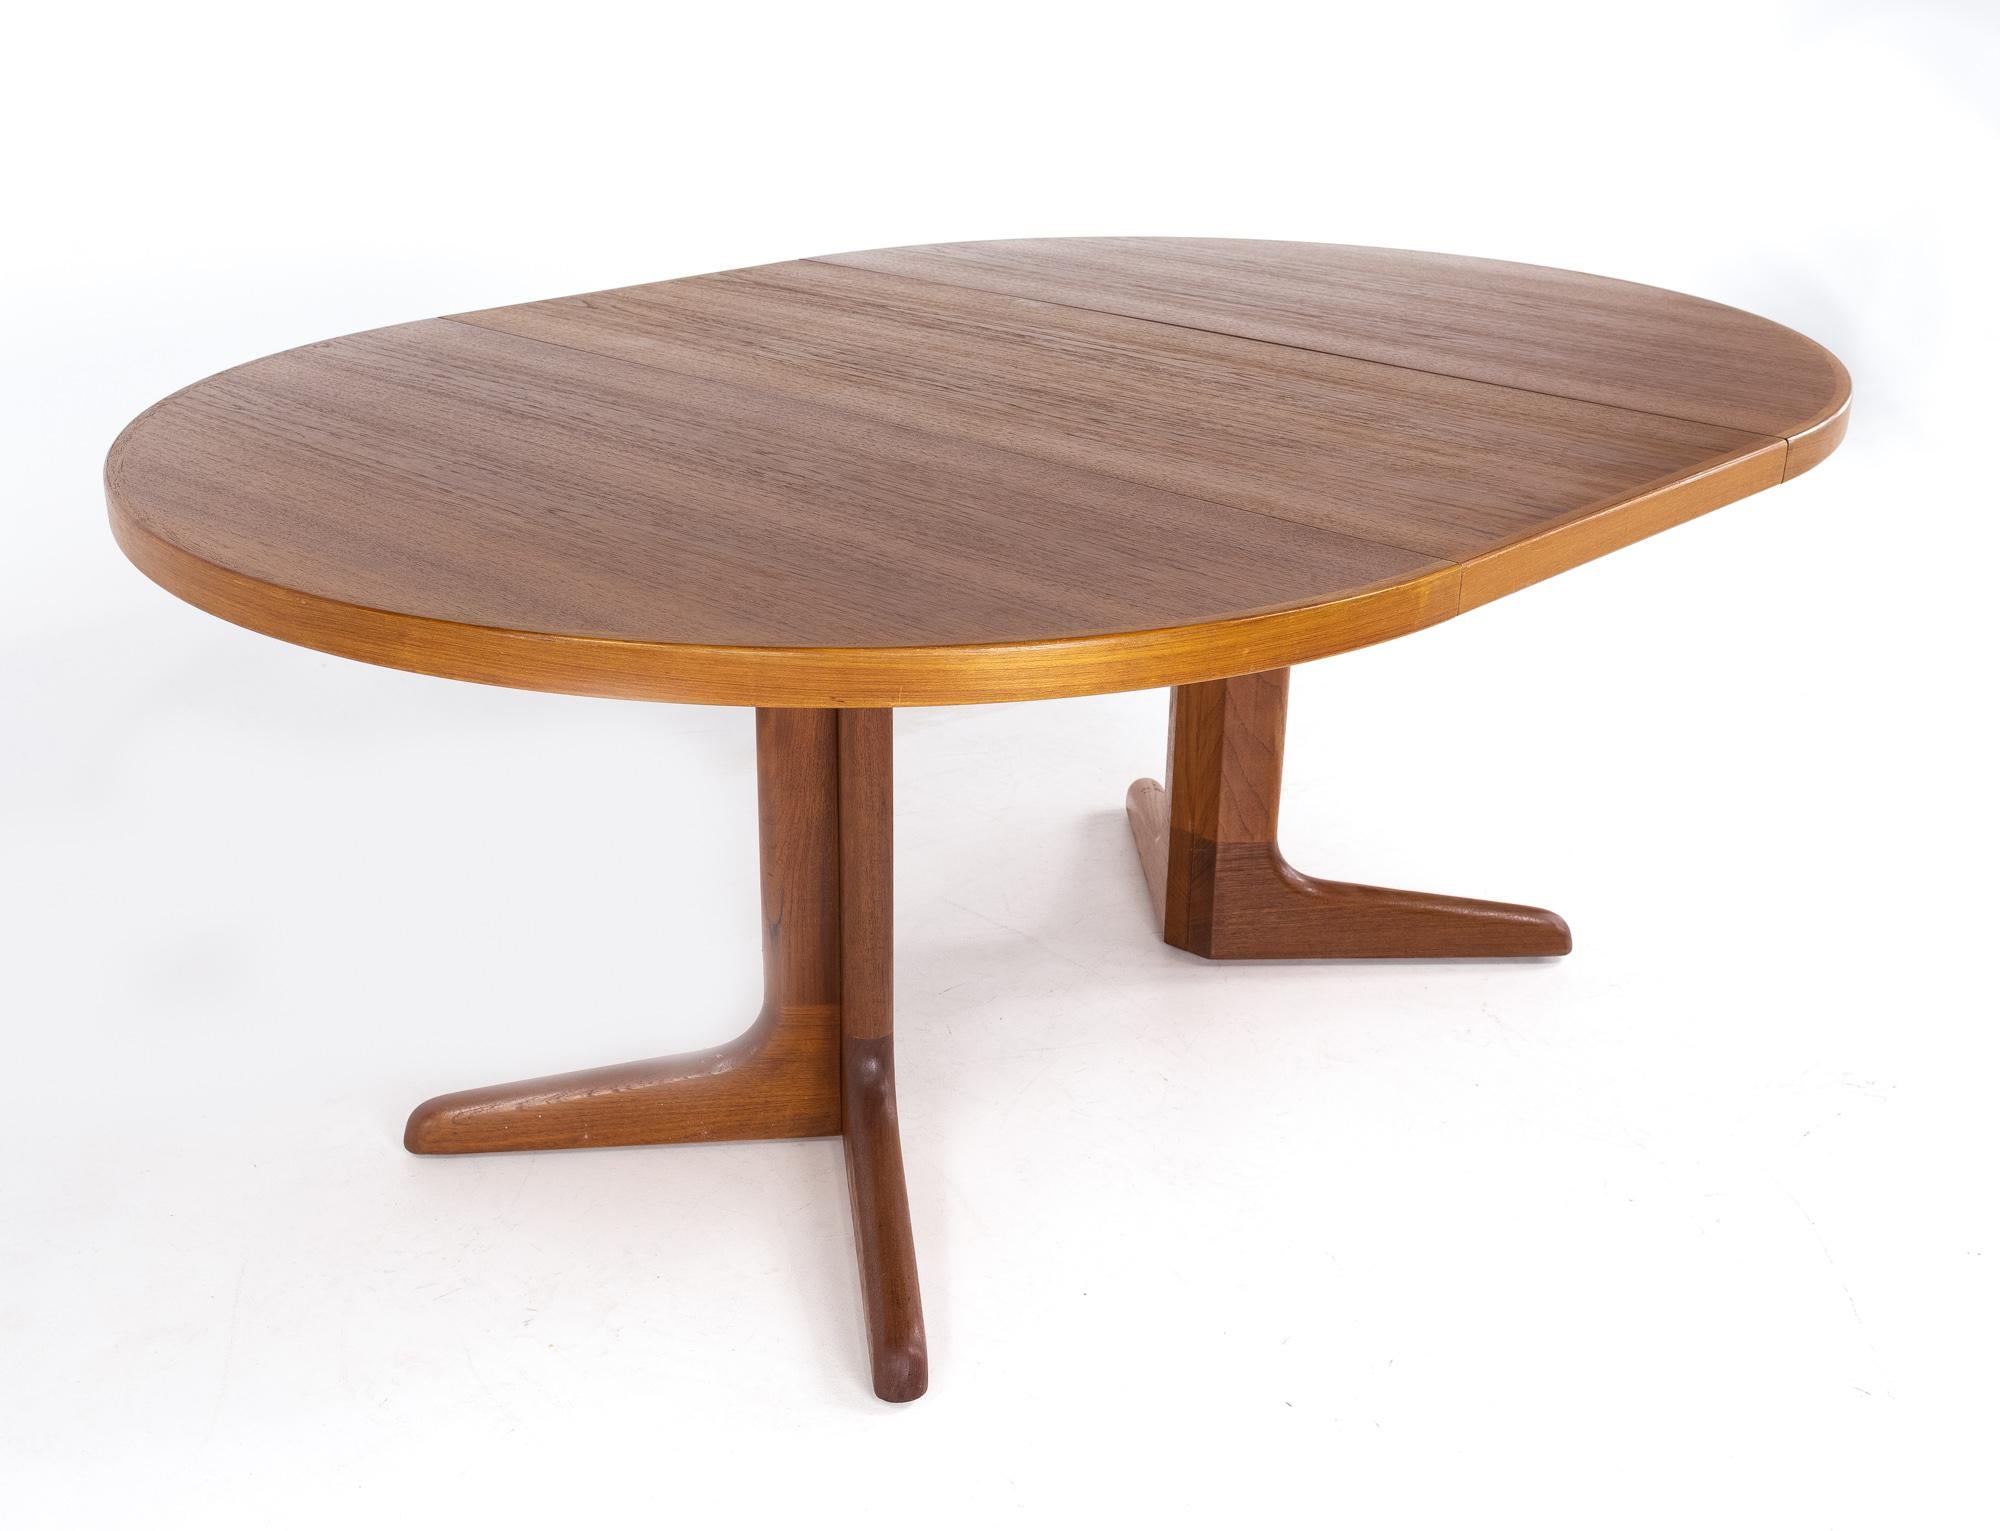 Late 20th Century Mid Century Danish Teak Pedestal Base Dining Table with 2 Leaves